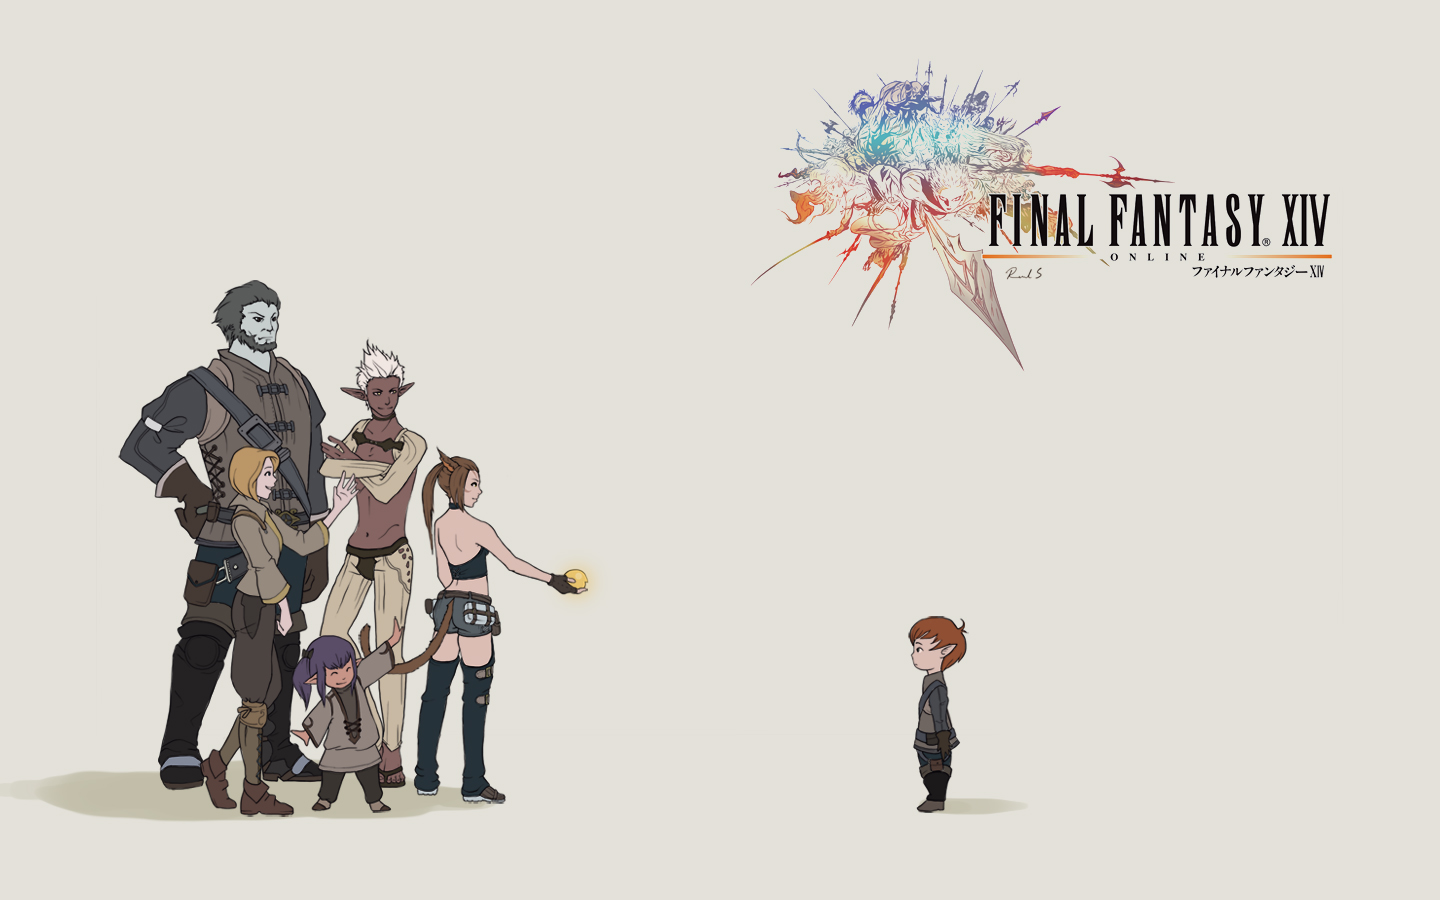 Great Wallpaper Everyday Ffxiv Second By Rikkubunny89 On